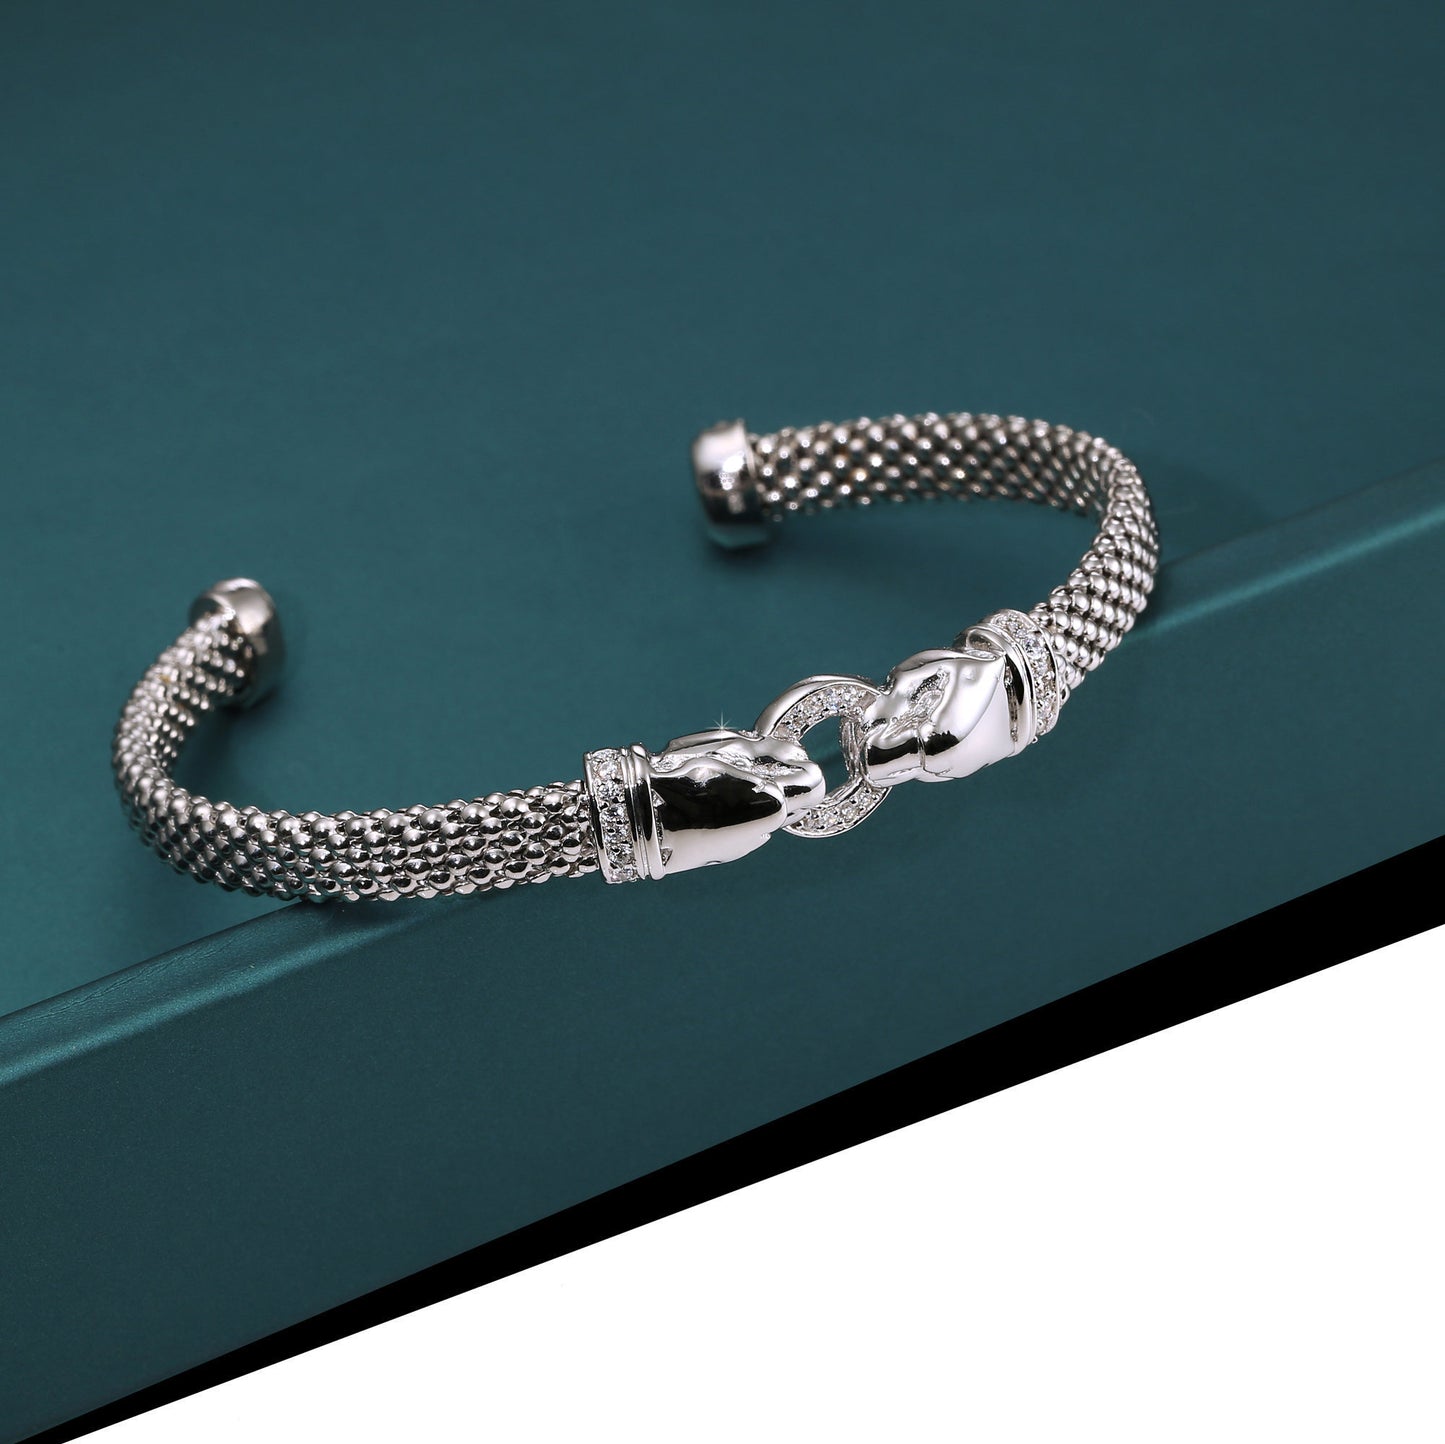 Jaguar Ring Cuff Bracelet in Sterling Silver, Slip On Bangle with Cz Stones, Fits 6 and 7 inch wrist